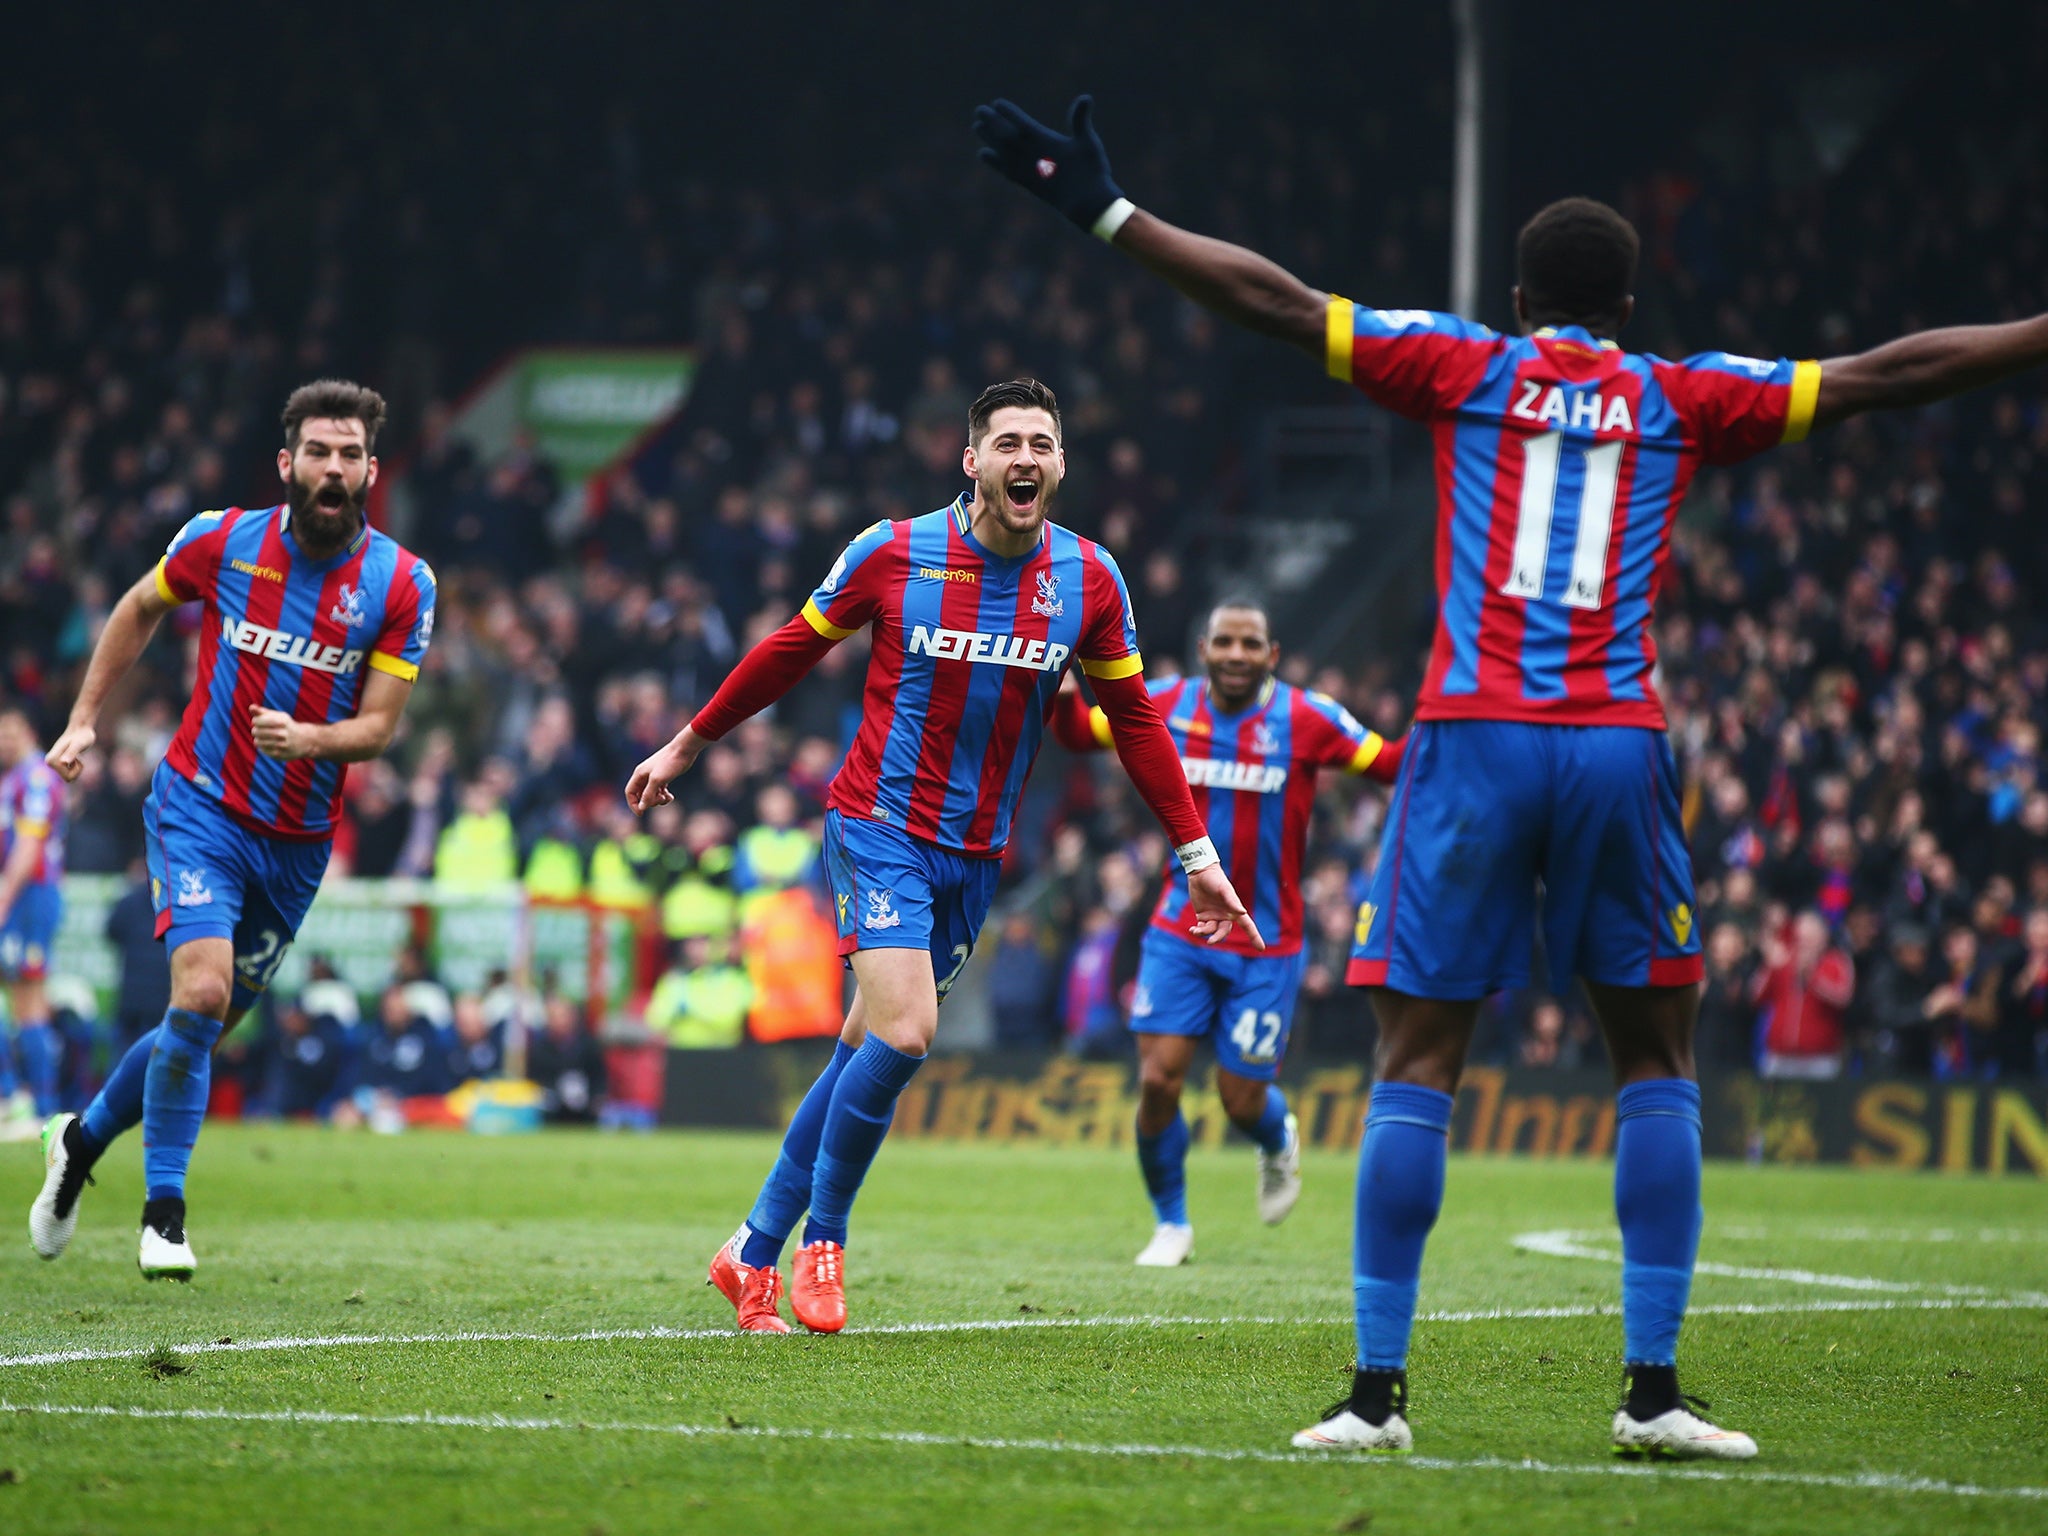 QPR were blown away by Crystal Palace